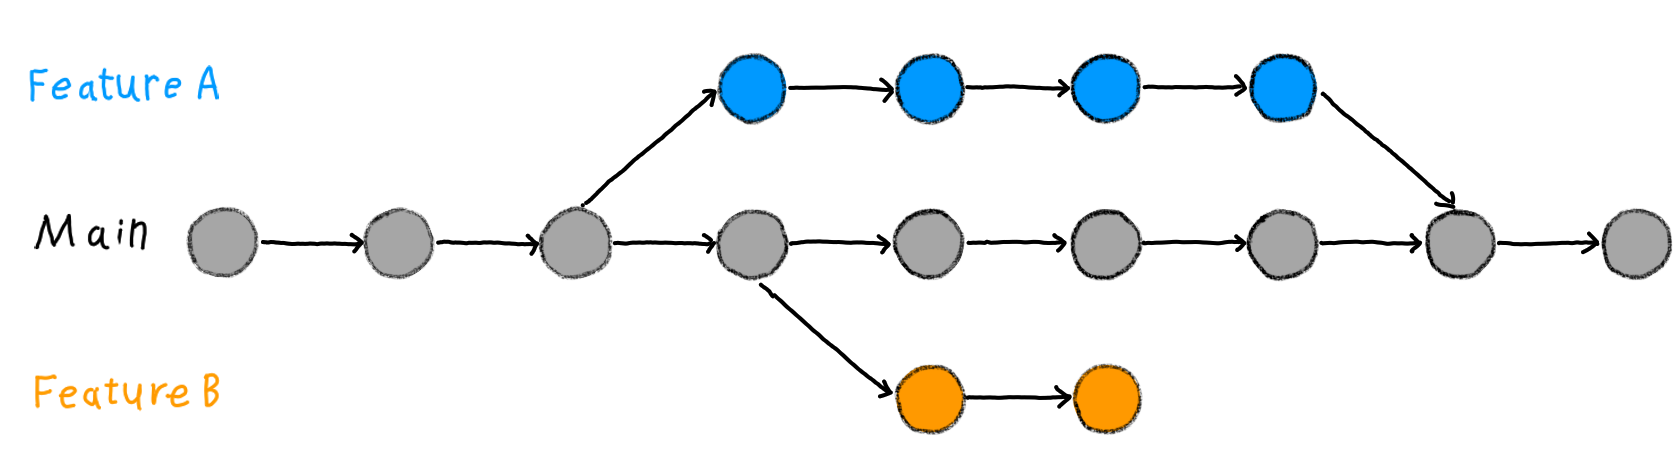 An illustration of two development branches and one main branch in git